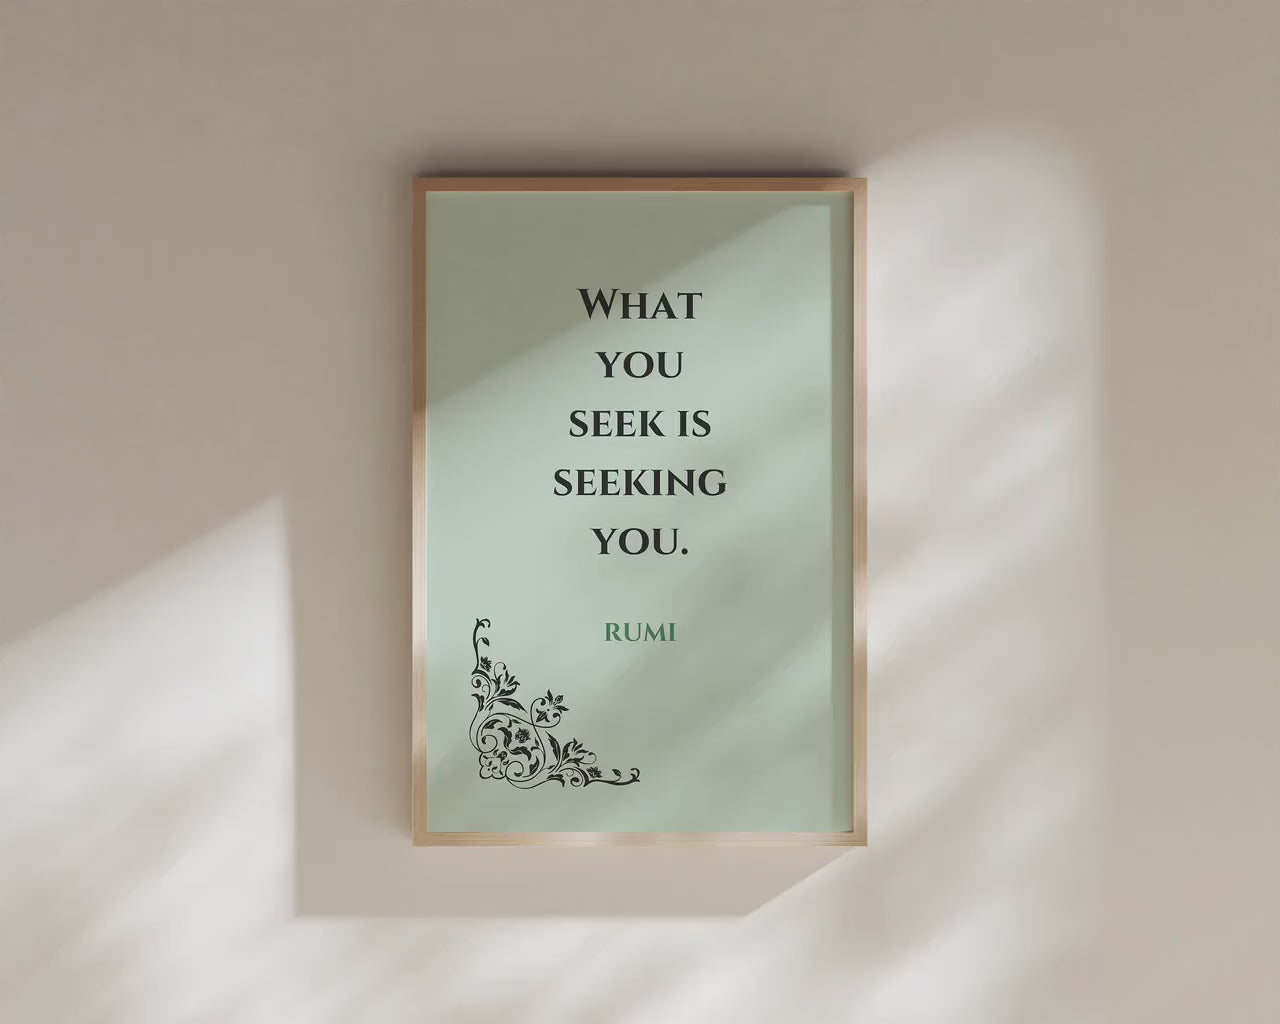 Rumi - Seek | Mint Green Inspirational Quote Poetry Poster (available framed or unframed)